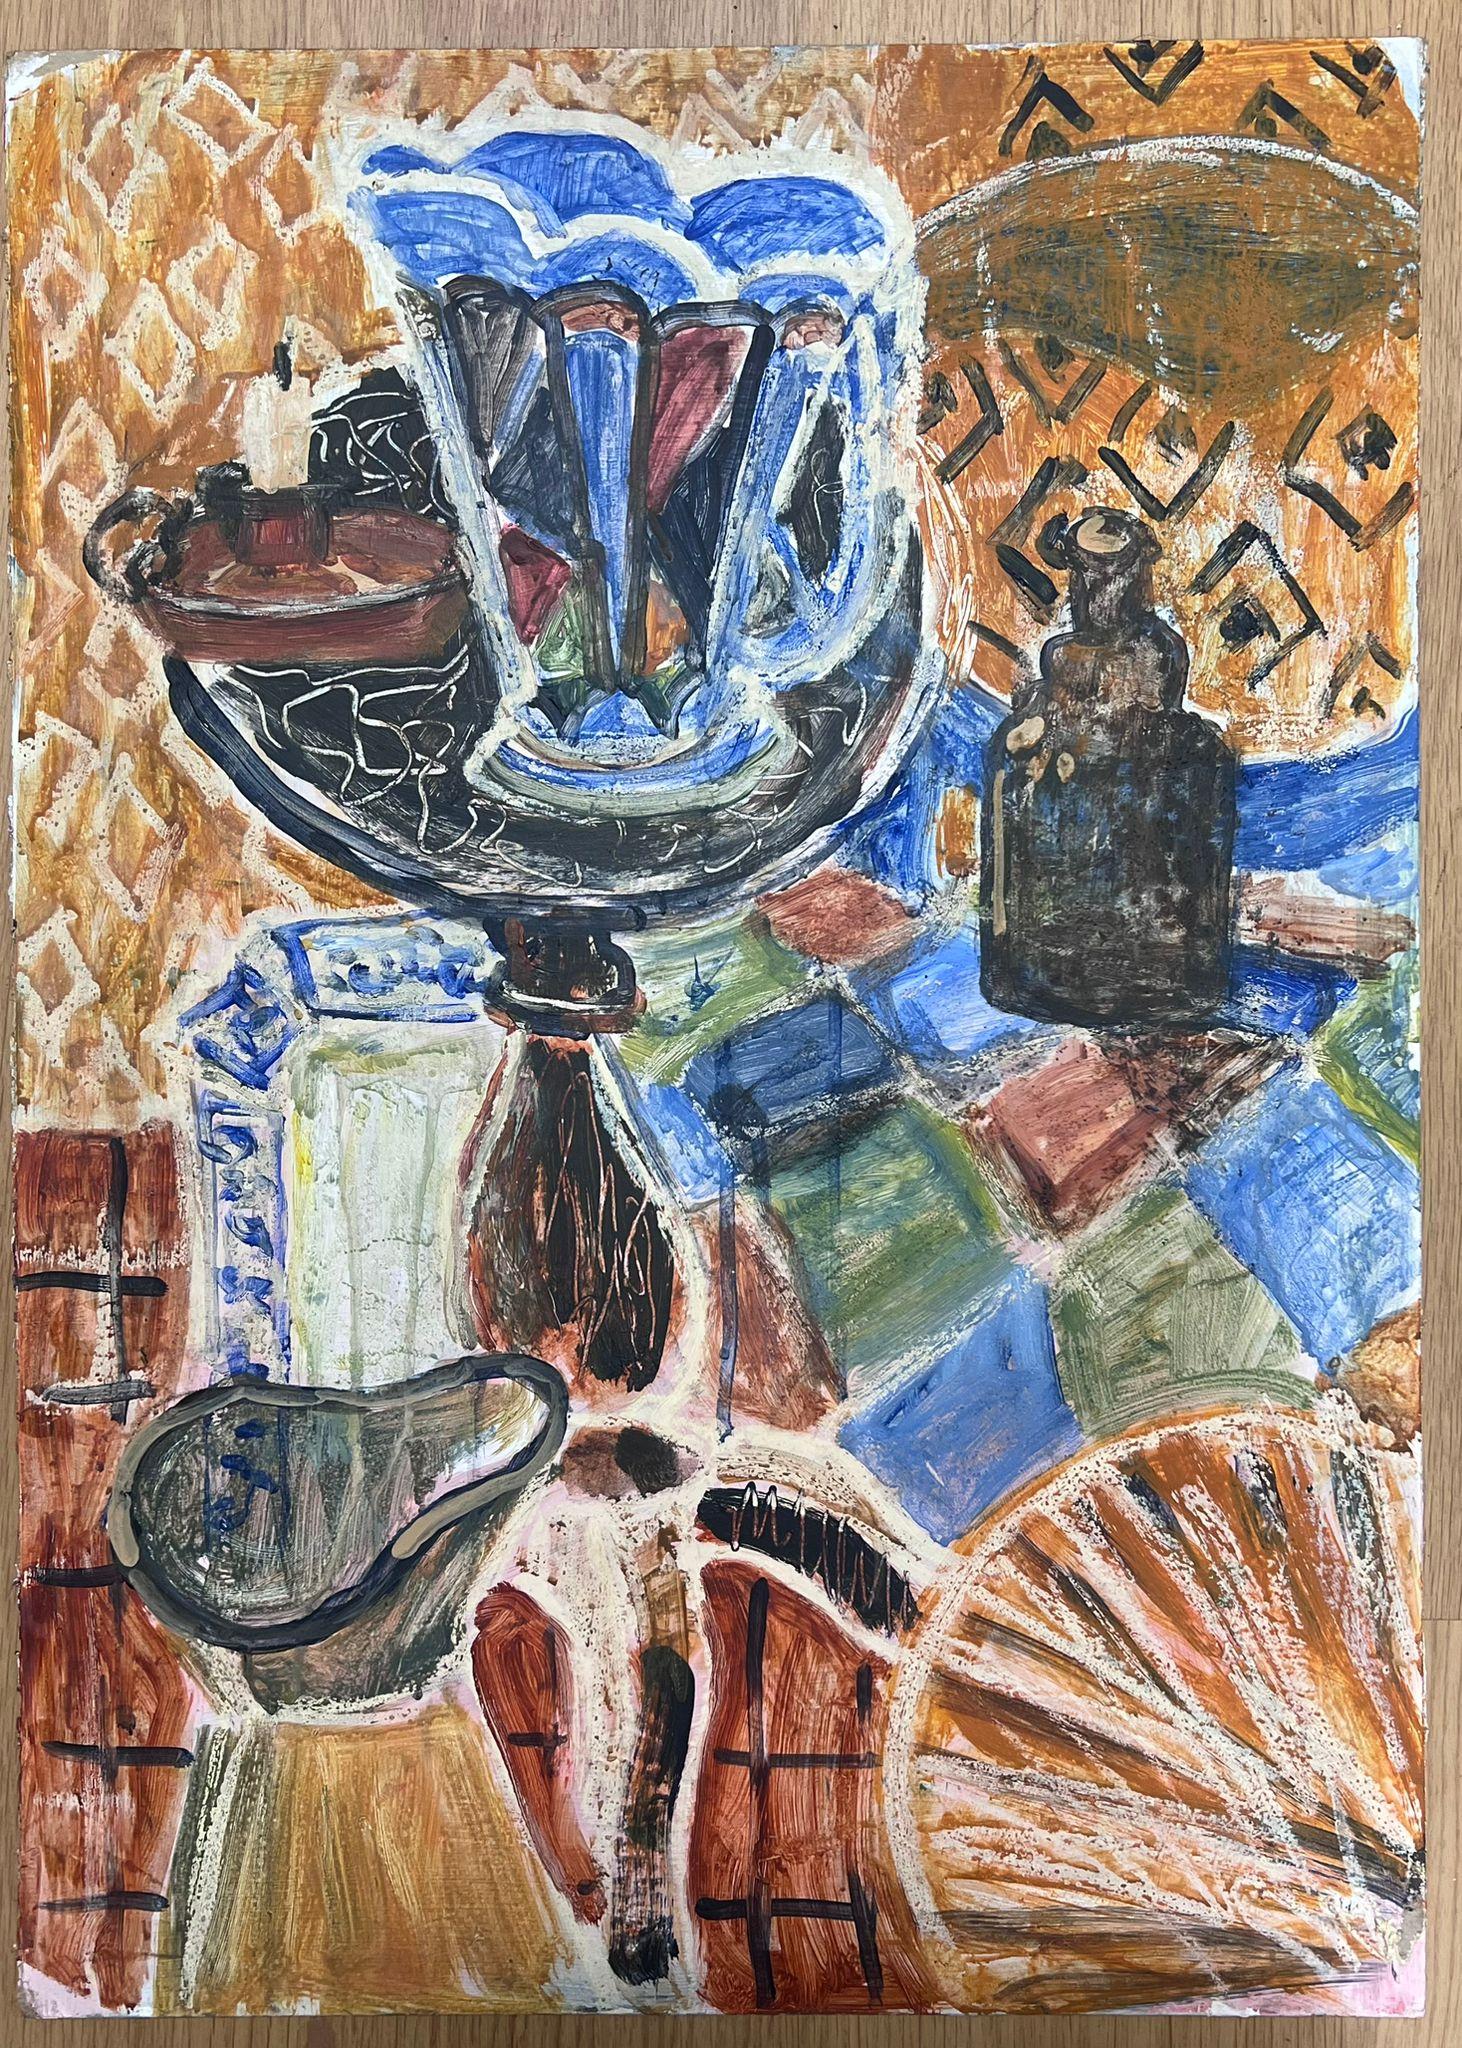 Jug Abstract Interior
by Helen Greenfield (British 20th century)
oil painting on board, unframed
board: 25 x 18 inches
condition: overall very good
provenance: all the paintings we have by this artist have come from their studio sale in